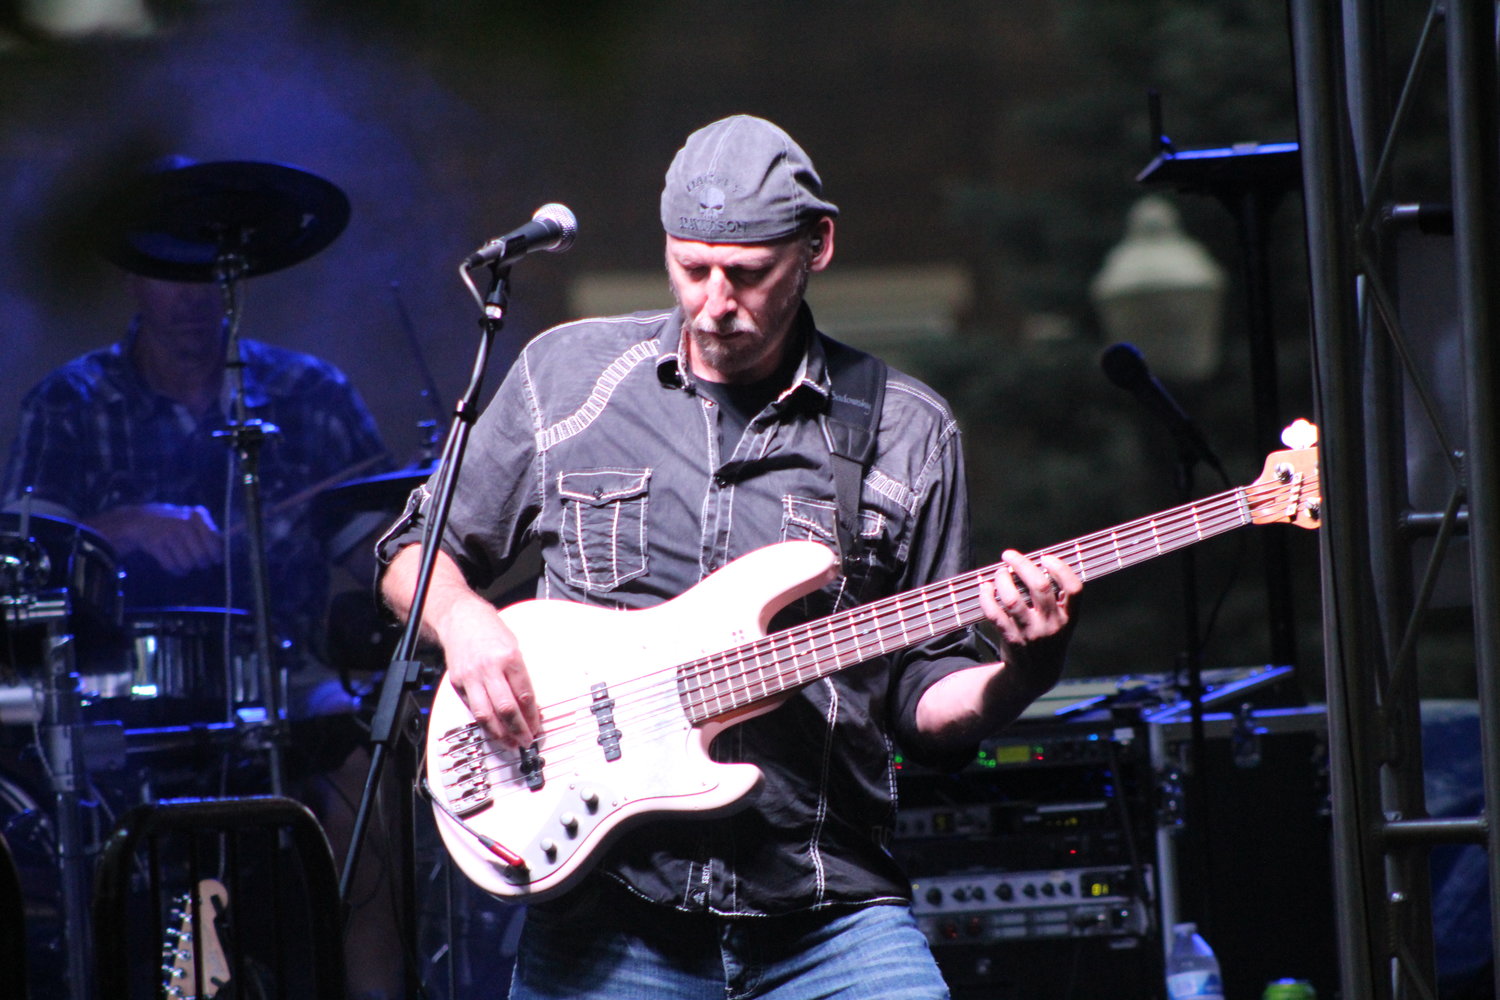 Big Roscoe and the Hammers bass player performs a solo during their performance as the headlining band on Saturday.